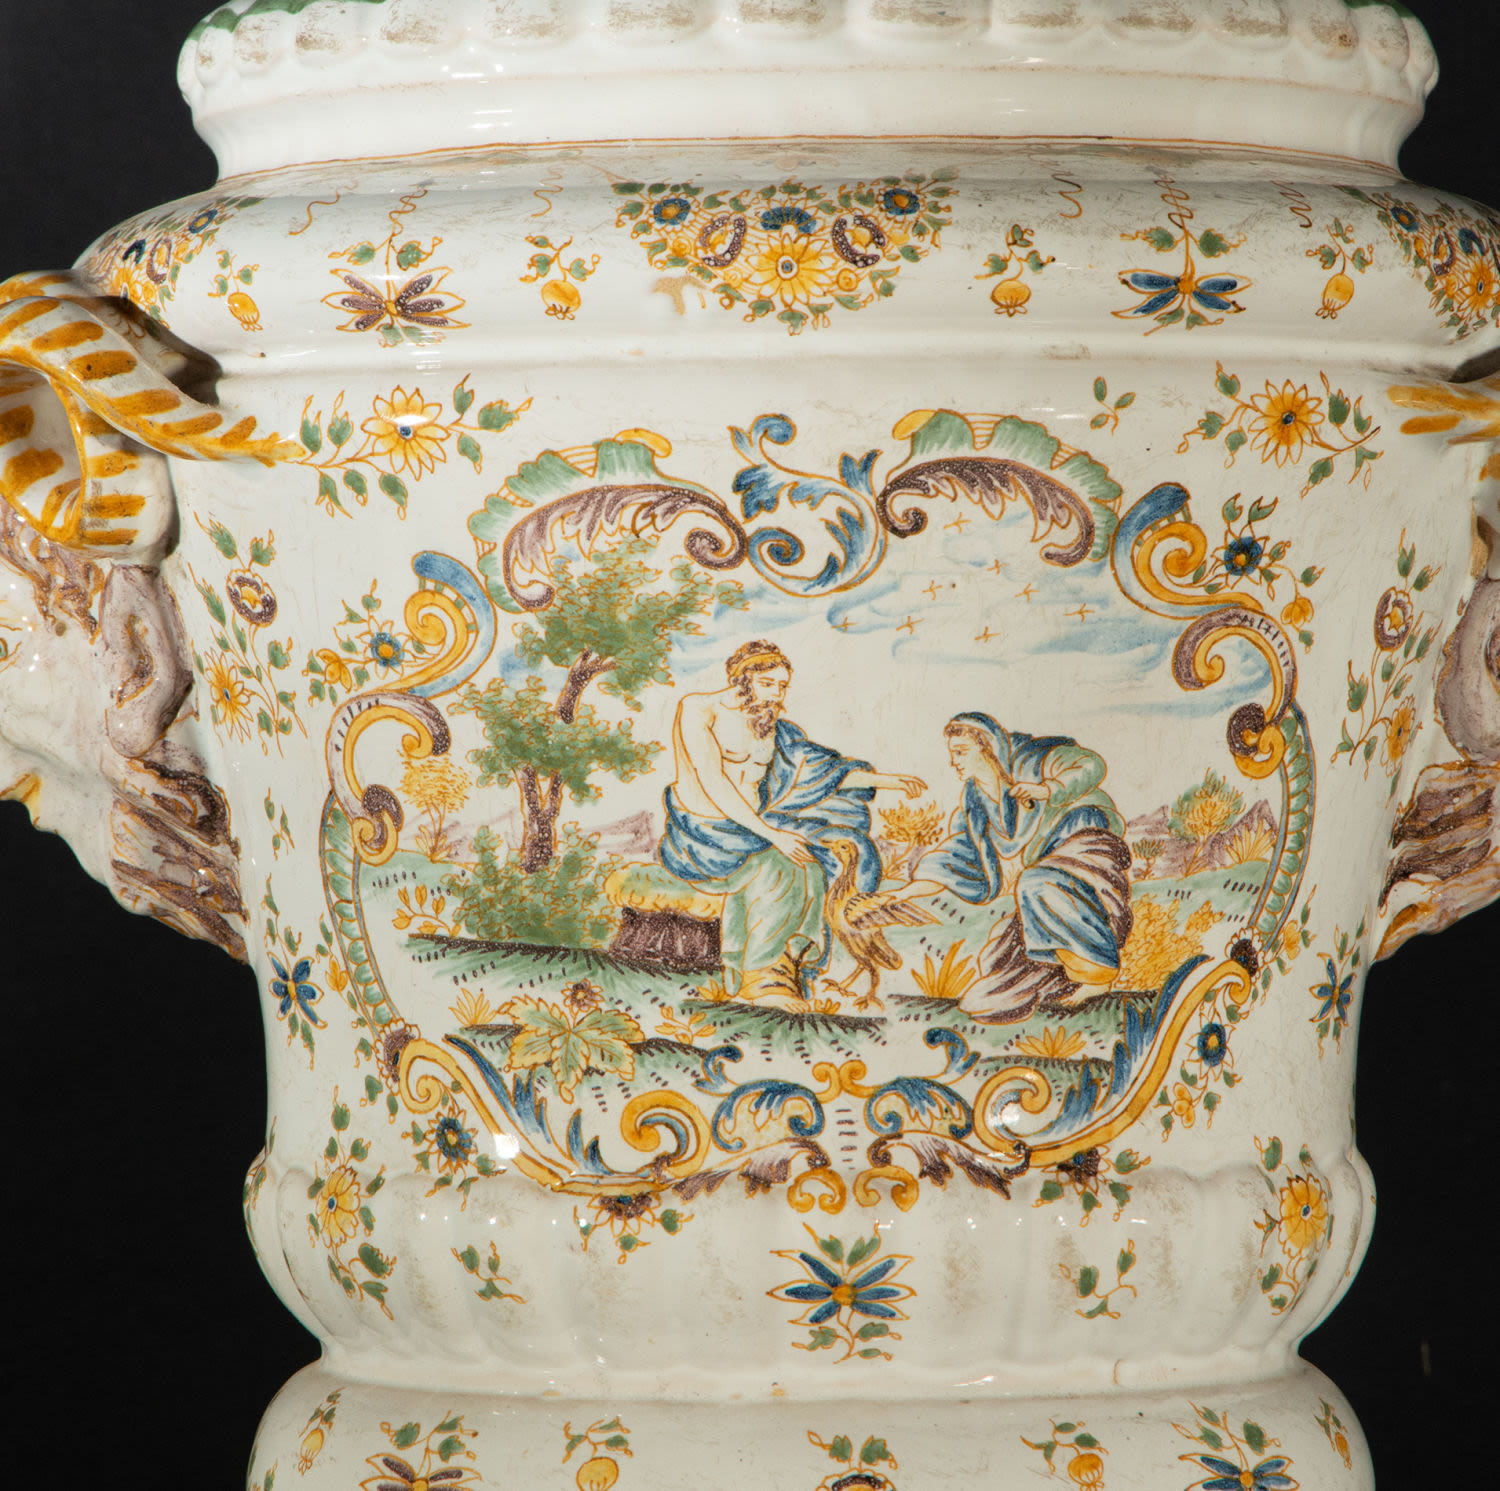 Ceramic vase from Moustiers, France, 18th century - Image 3 of 6